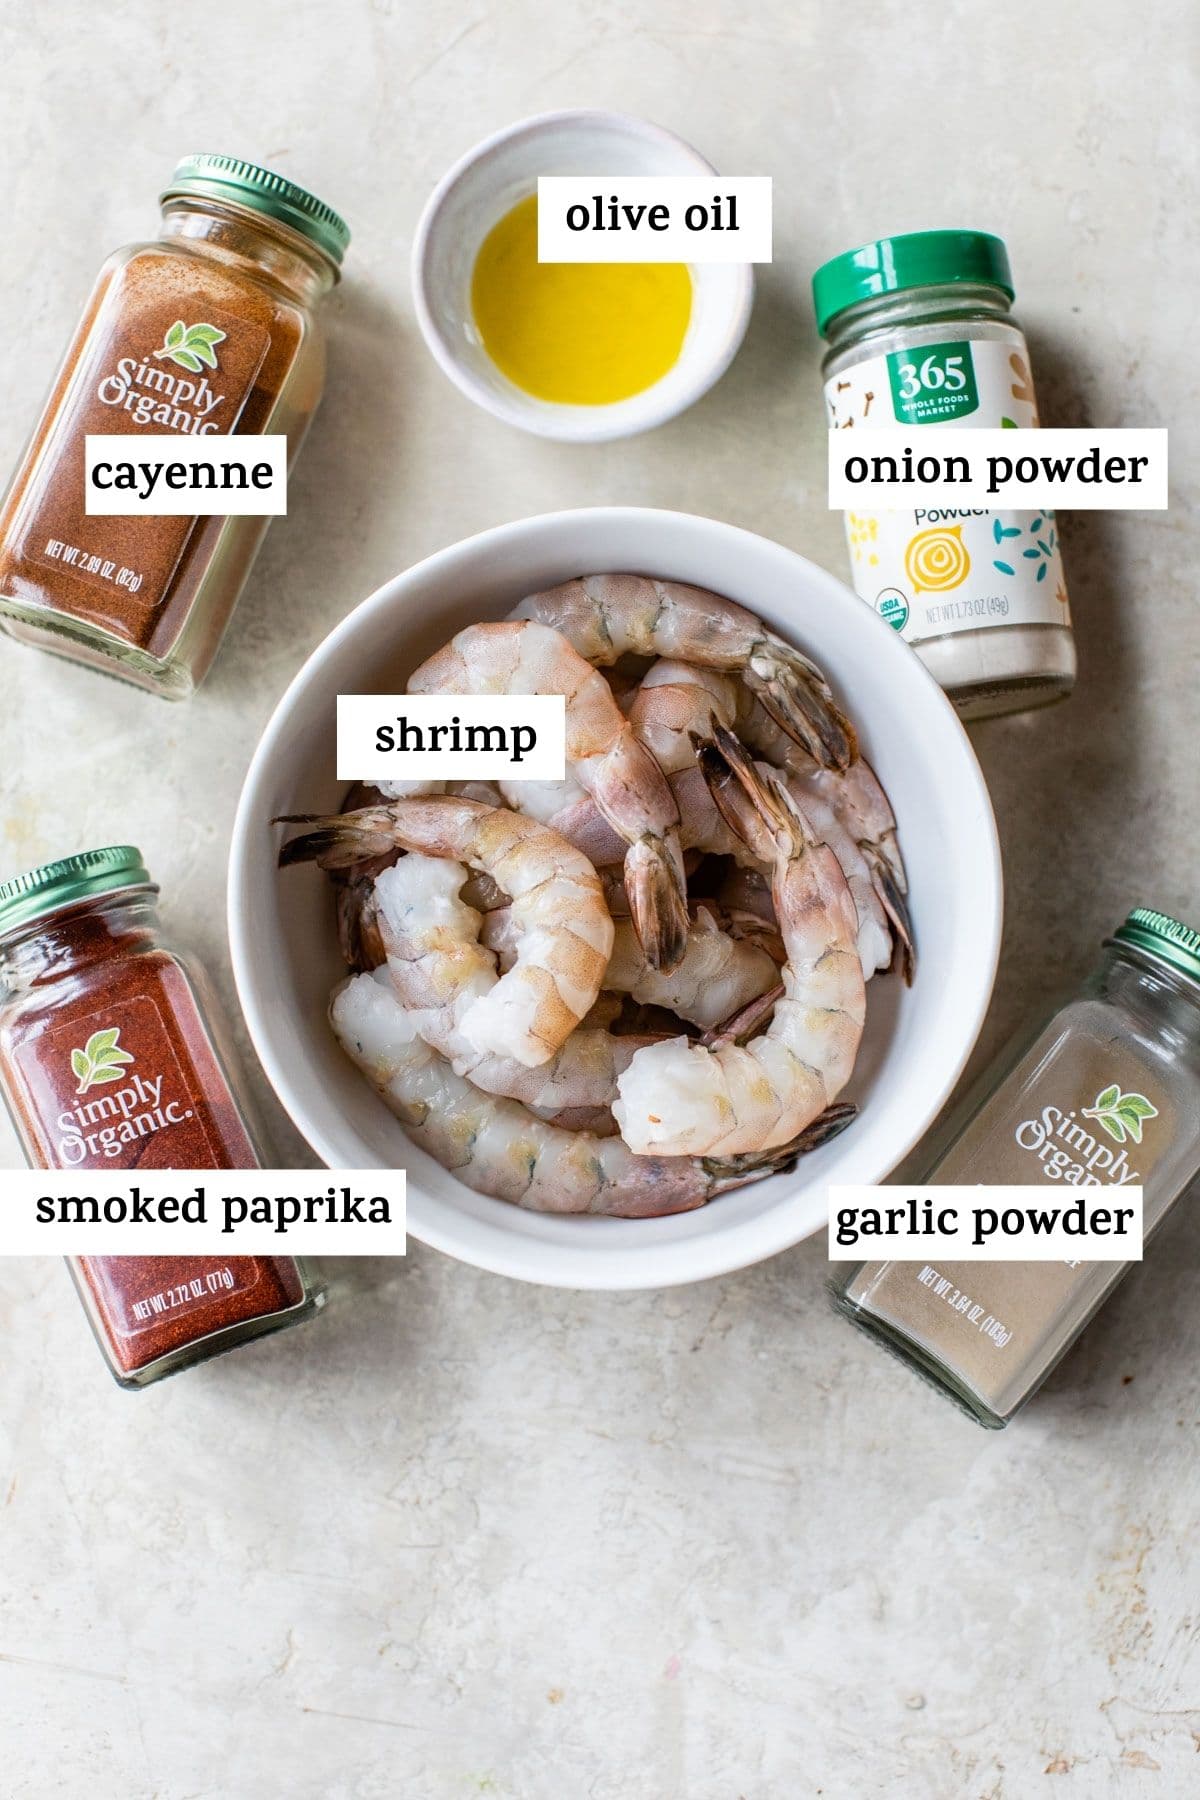 ingredients to make air fryer shrimp like raw shrimp and spices